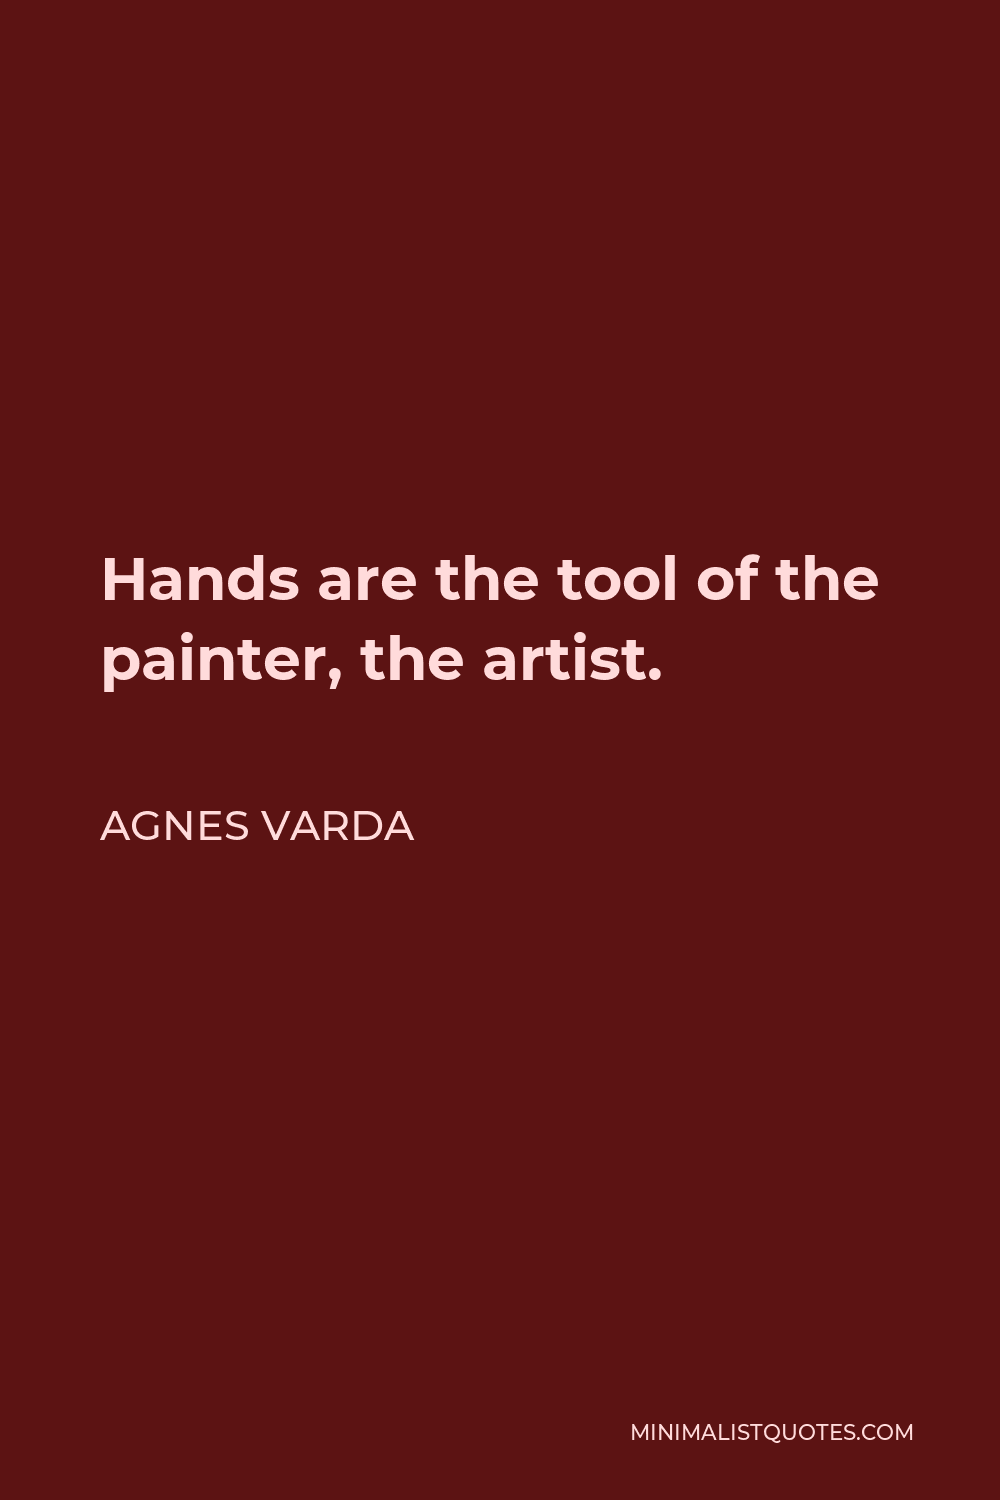 Agnes Varda Quote - Hands are the tool of the painter, the artist.